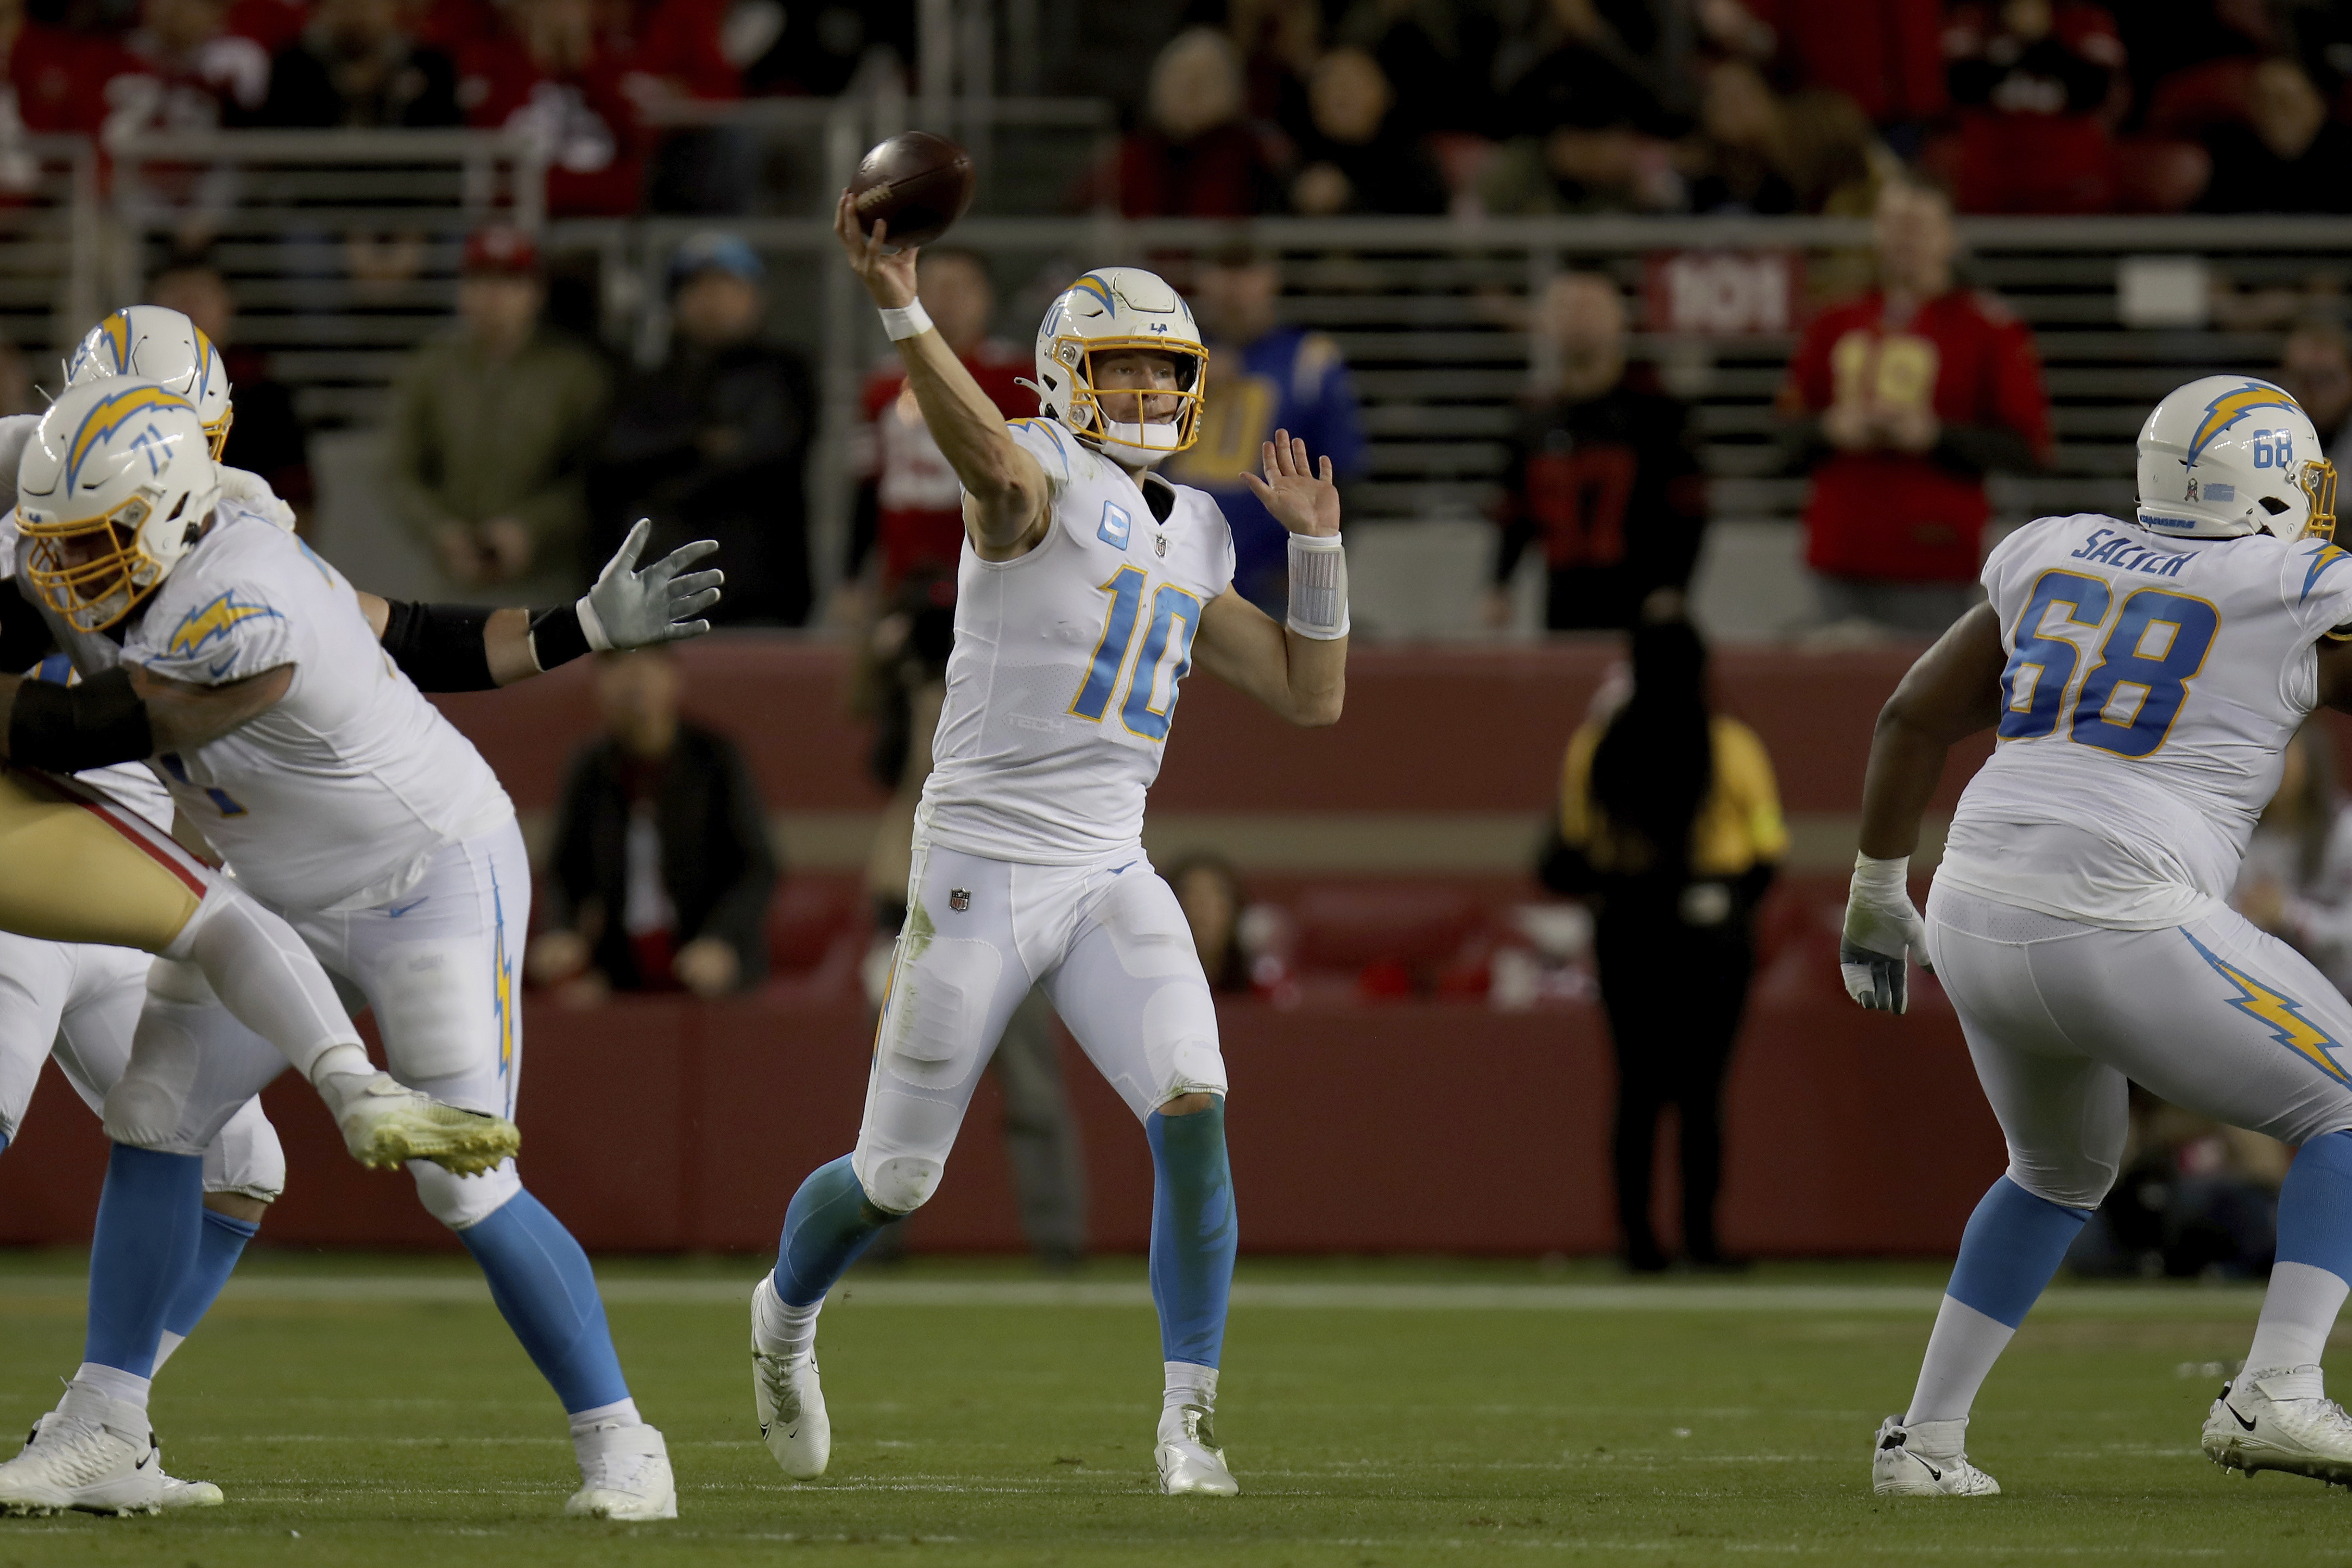 How to Watch the Kansas City Chiefs vs. Los Angeles Chargers - NFL Week 11